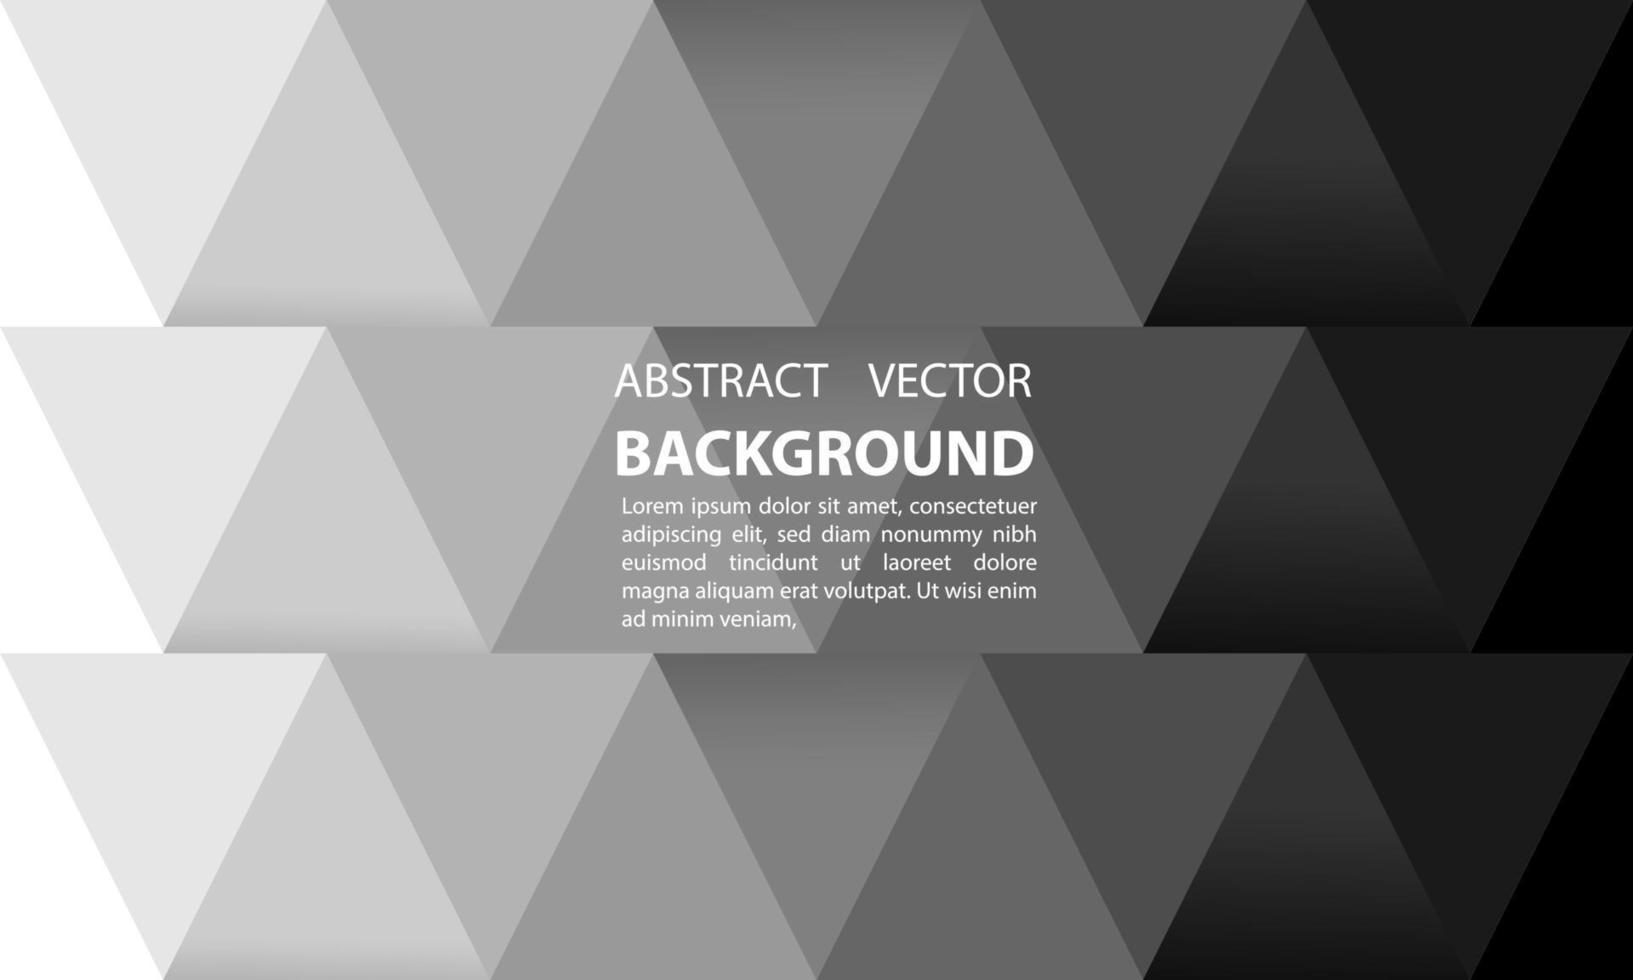 background abtrak gradient geometric horizontal verical form abstract lines of grey vectors, for posters, banners, and others, vector design illustration eps 10